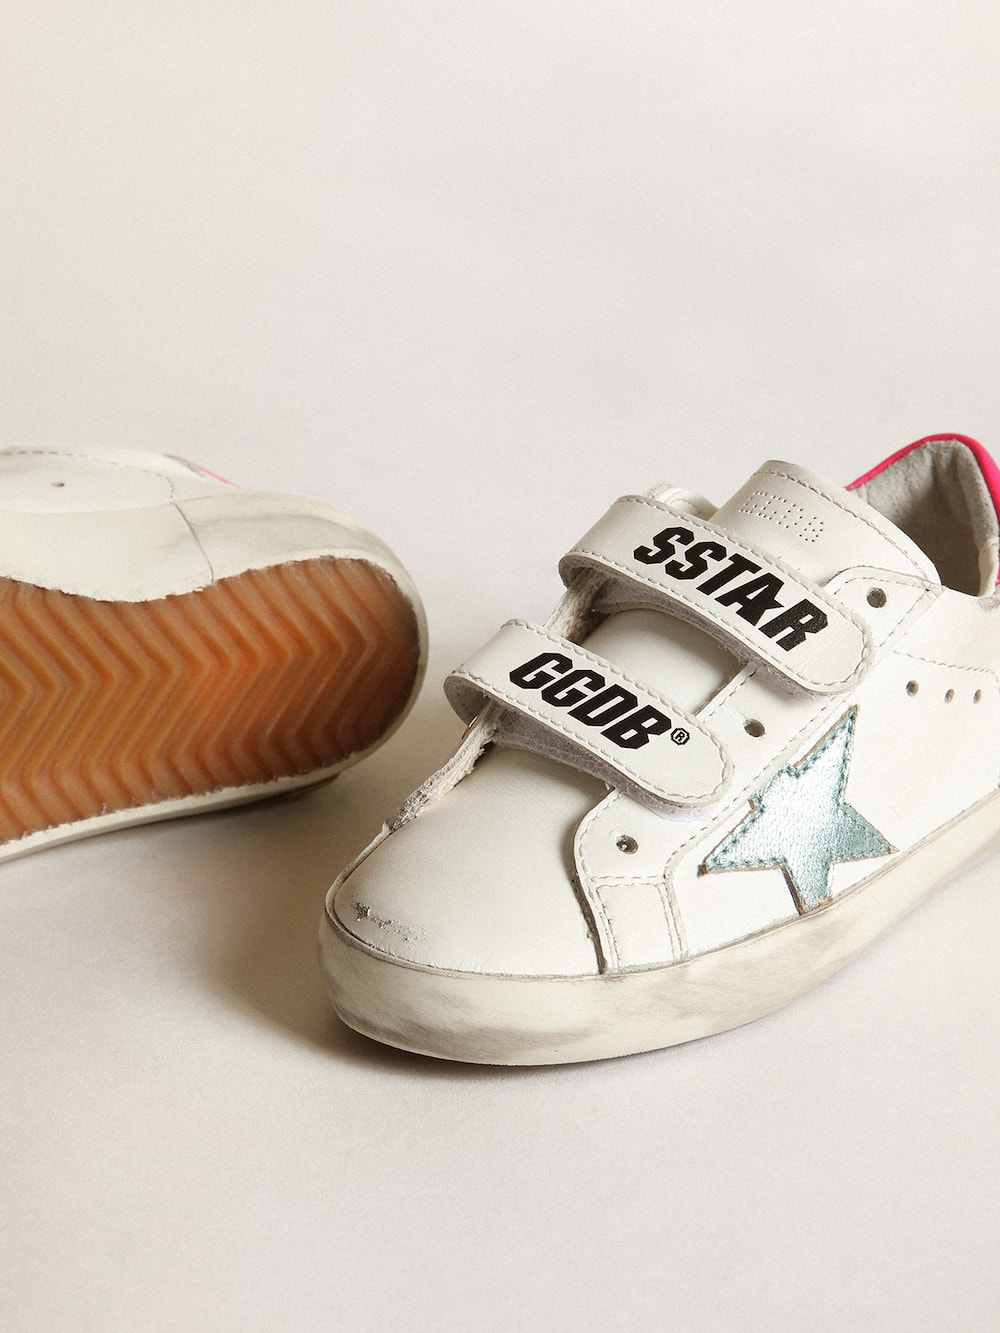 Golden Goose - Young Old School with star in aquamarine laminated leather in 